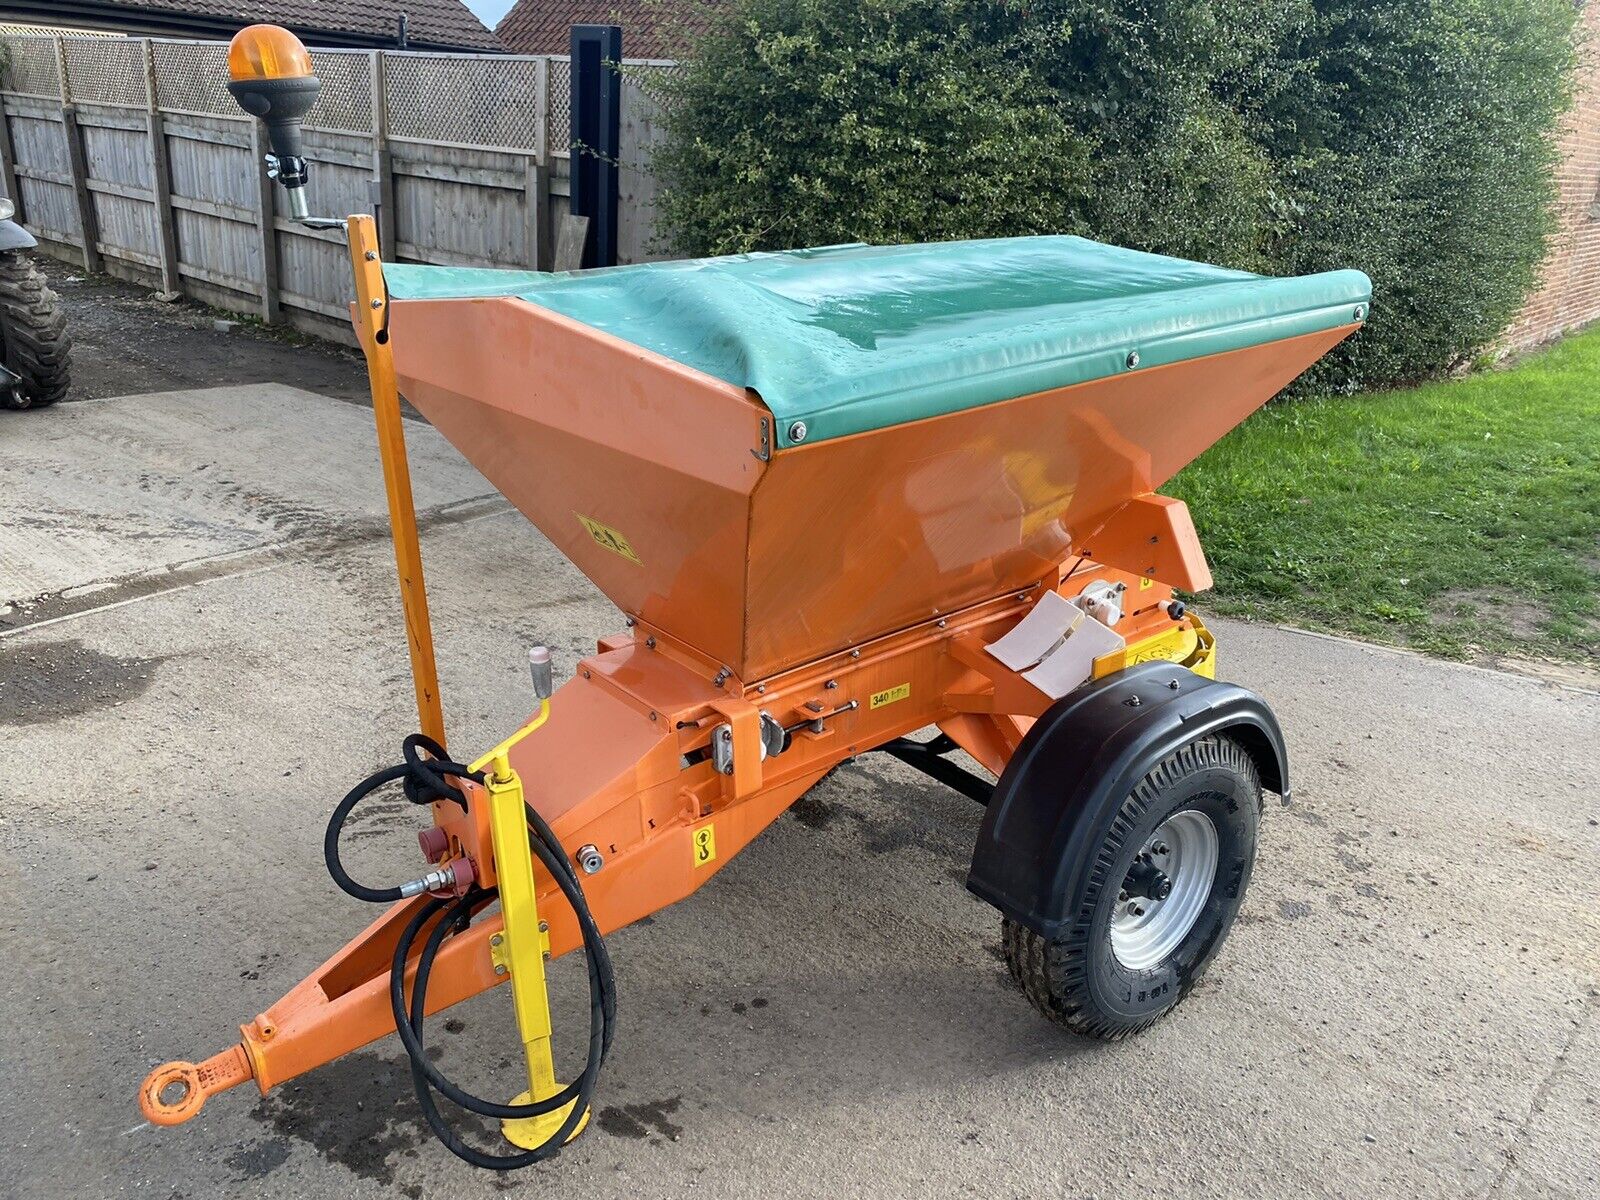 NEW AND UNUSED PRONAR KCT07 TOW ALONG HYDRAULIC GRITTER SALTER SPREADER